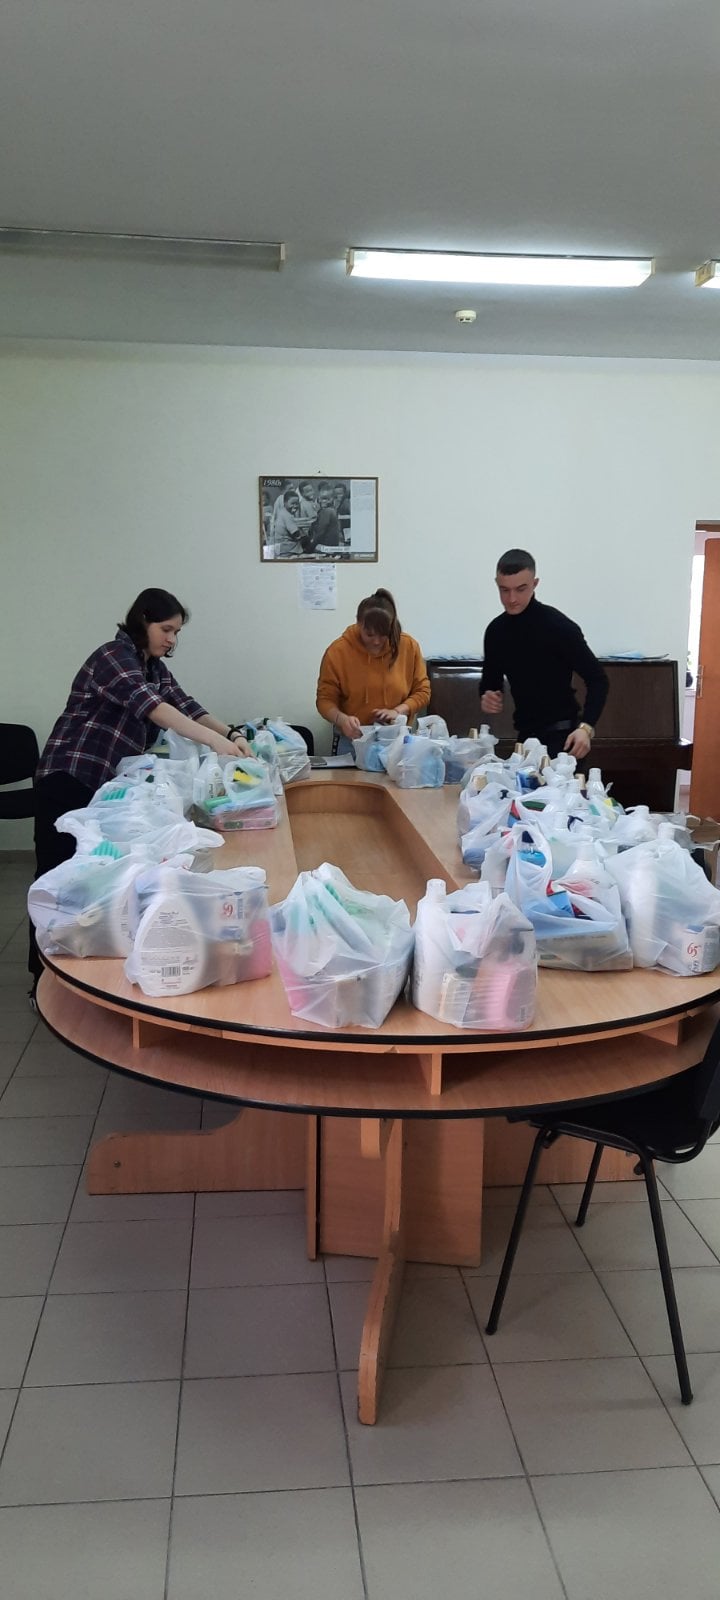 You are currently viewing HYGIENE PRODUCTS FOR UKRAINEAN ASYLUM SEEKERS FROM AUTOMALL COMPANY – PRODUSE IGIENICE PENTRU SOLICITANȚII DE AZIL DIN UCRAINA DIN PARTEA AUTOMALL SRL